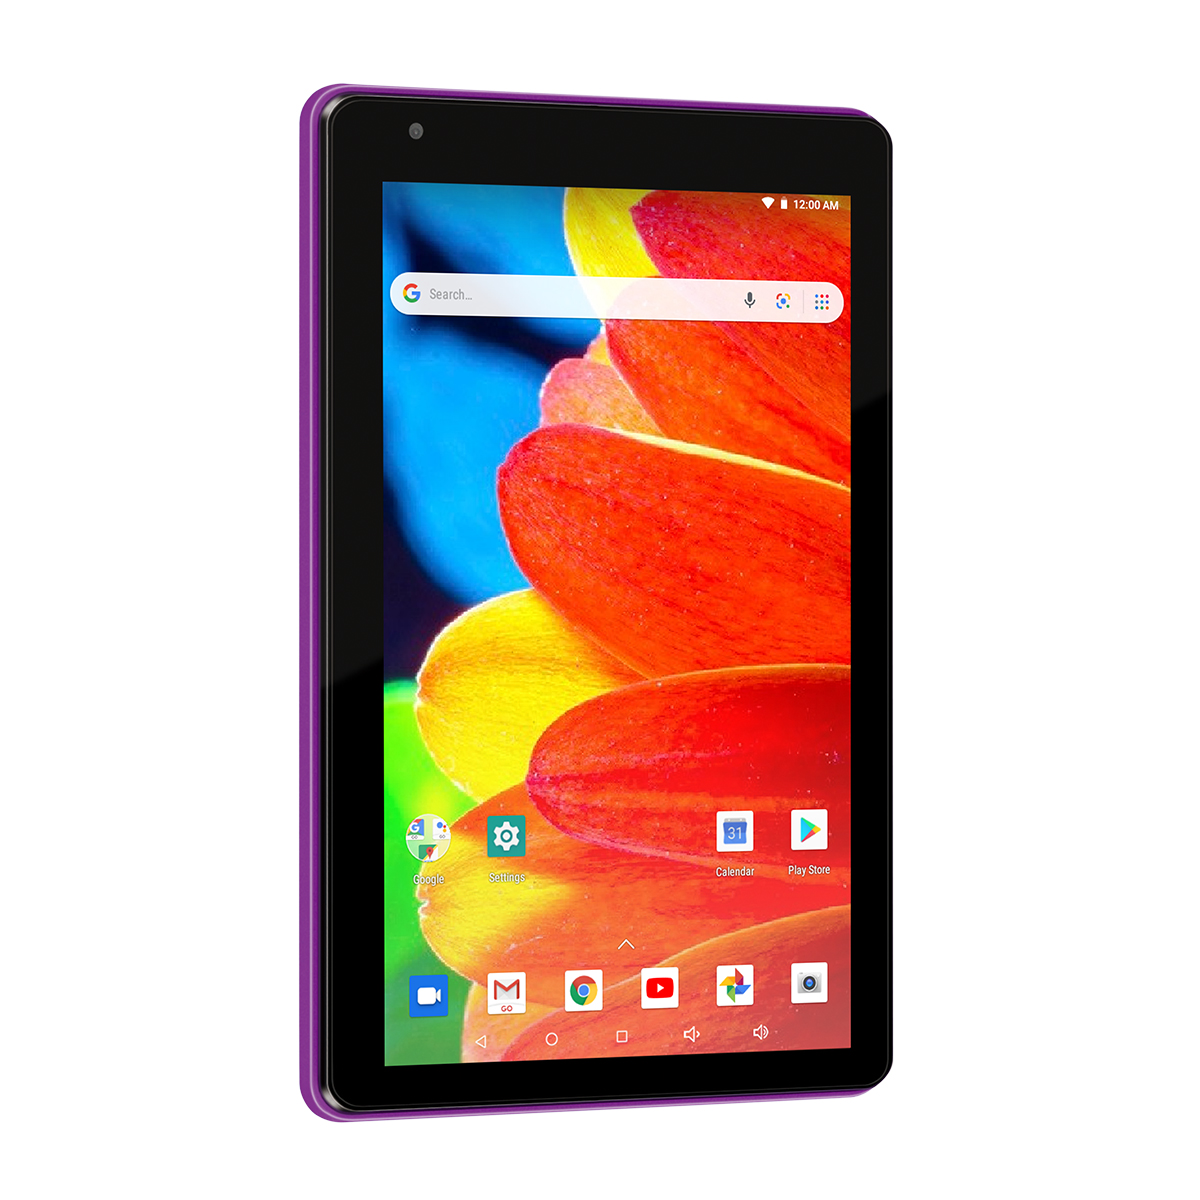 RCA Voyager 7" 16GB Tablet Android OS - Purple - RCT6873W42 - image 1 of 2